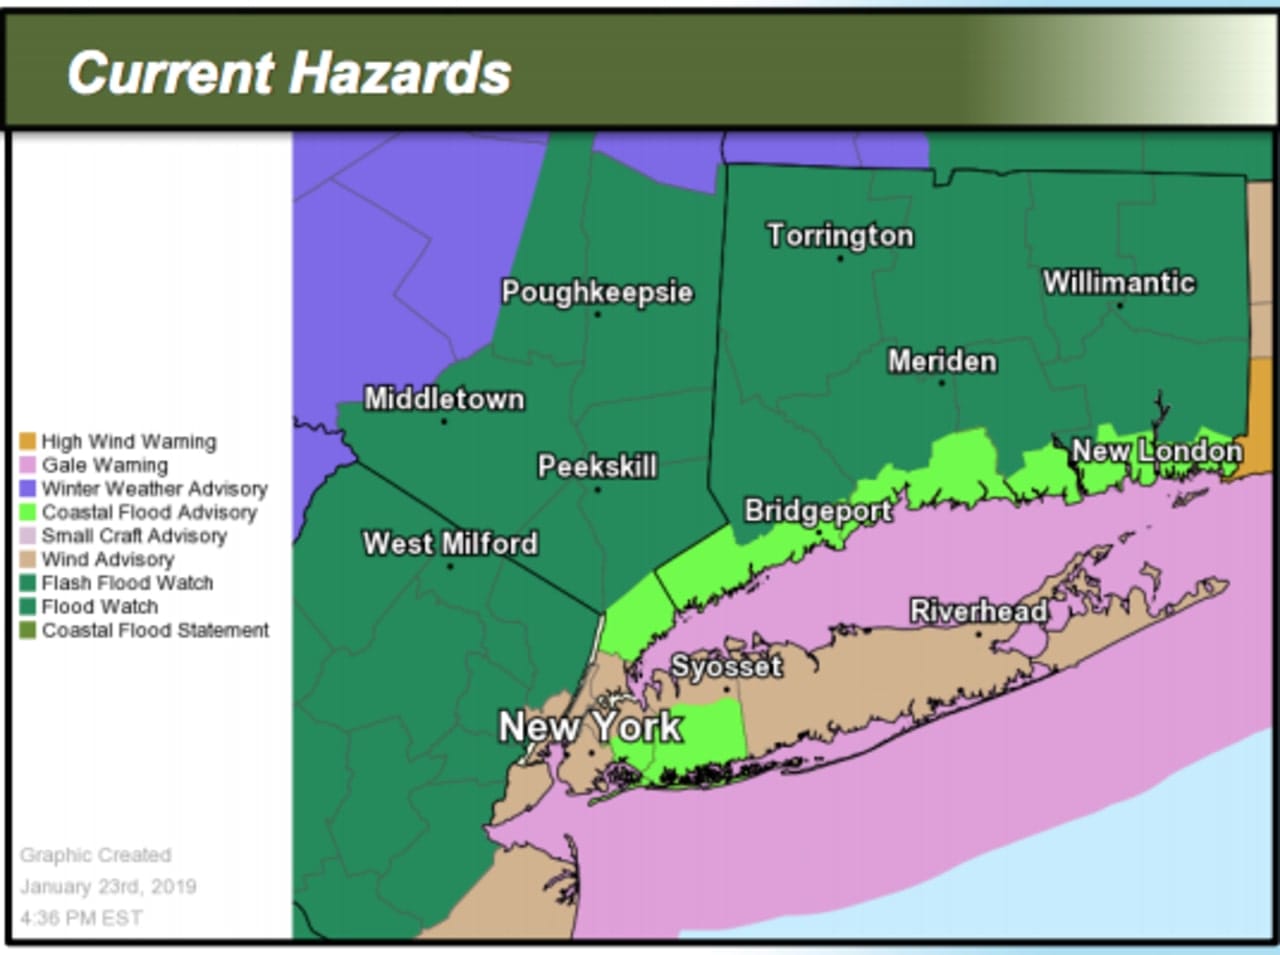 A look at areas where a Coastal Flood Advisory (light green) and Flash Flood Watch (green) are in effect.